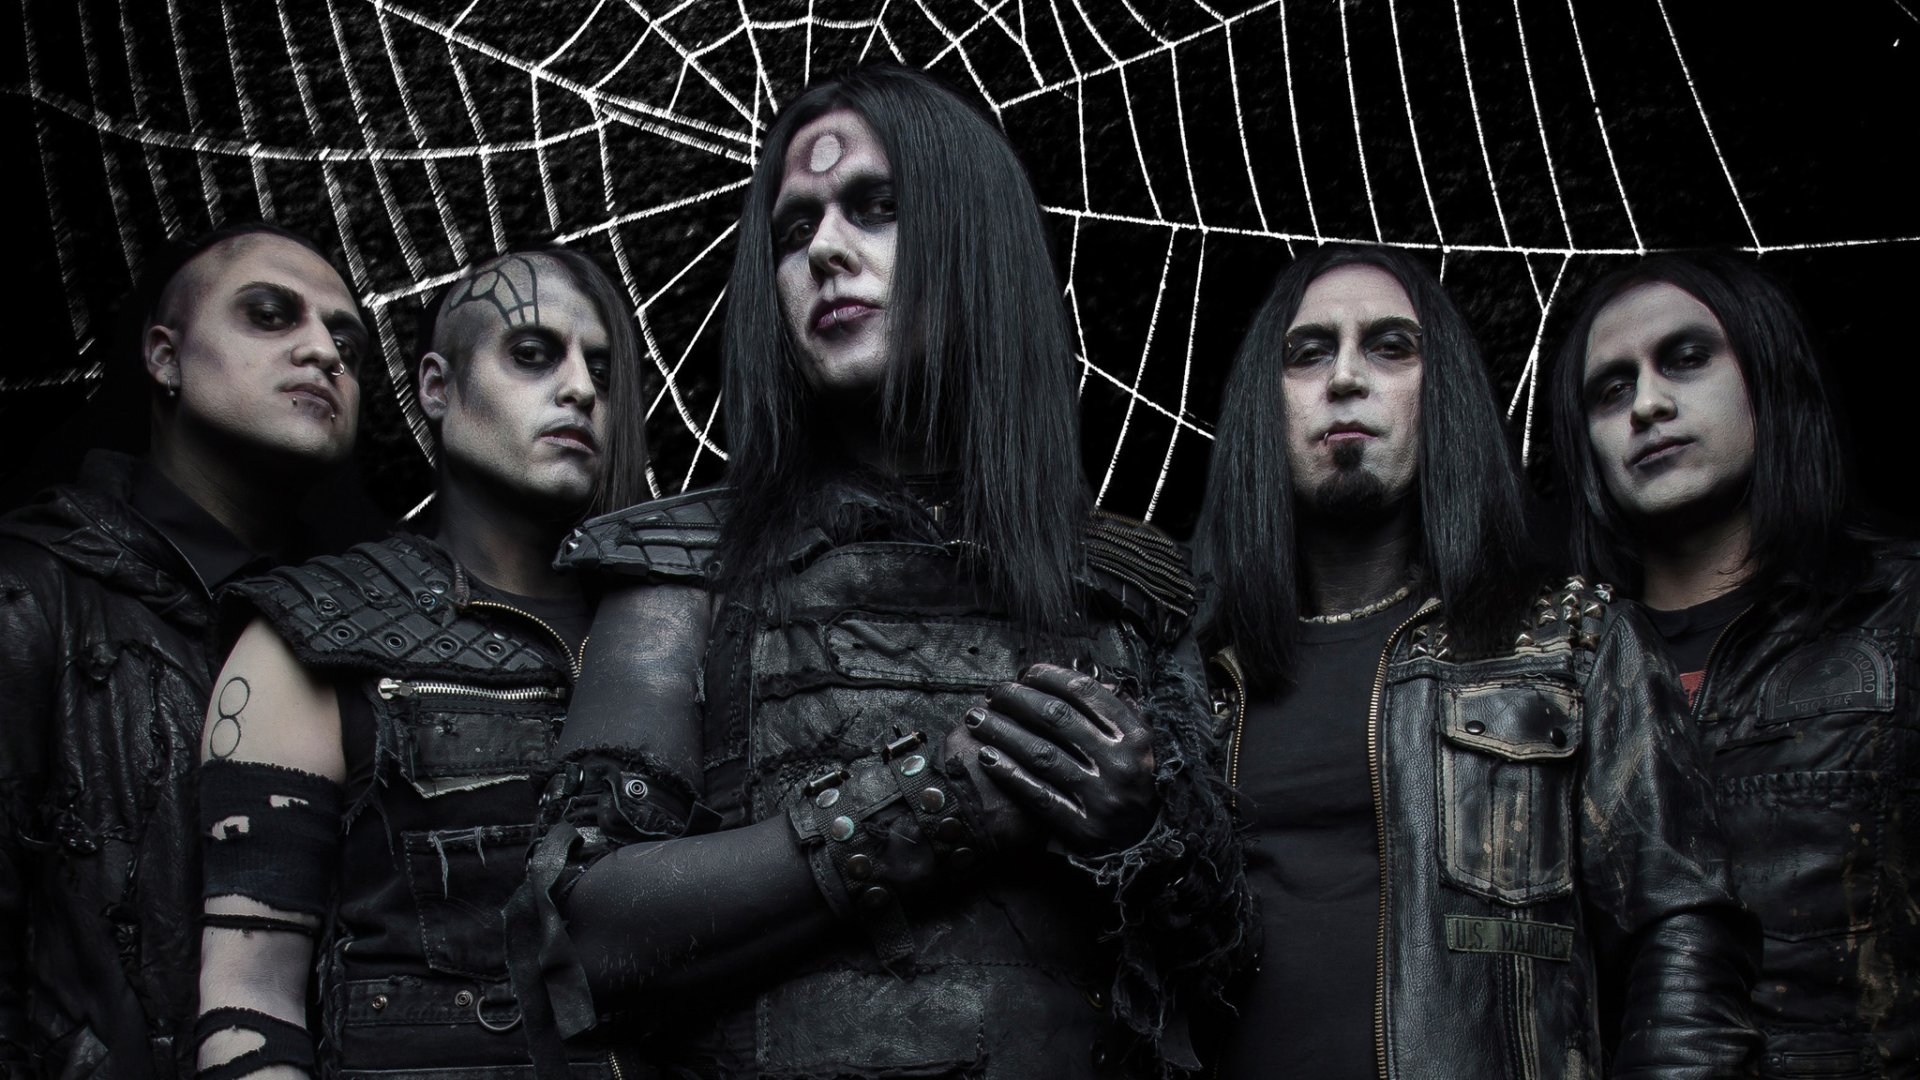 Wednesday 13 HD Wallpaper and Background Image